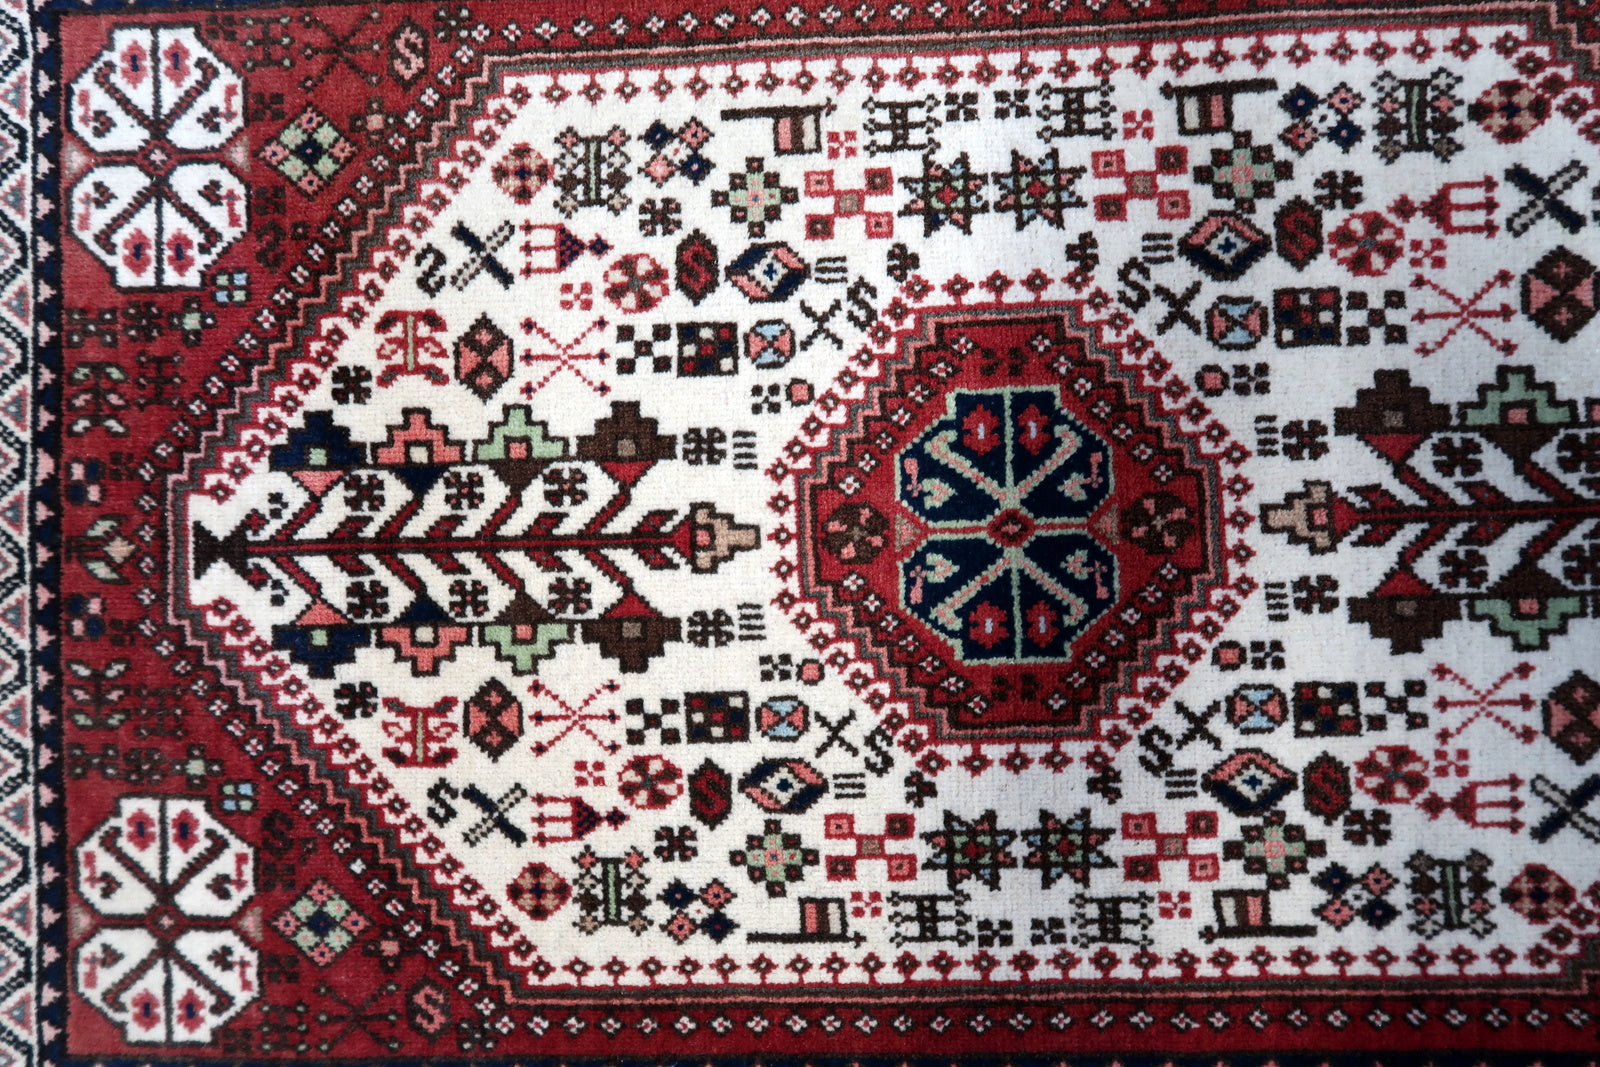 Overhead shot of the rug displaying its symmetrical patterns and faded colors